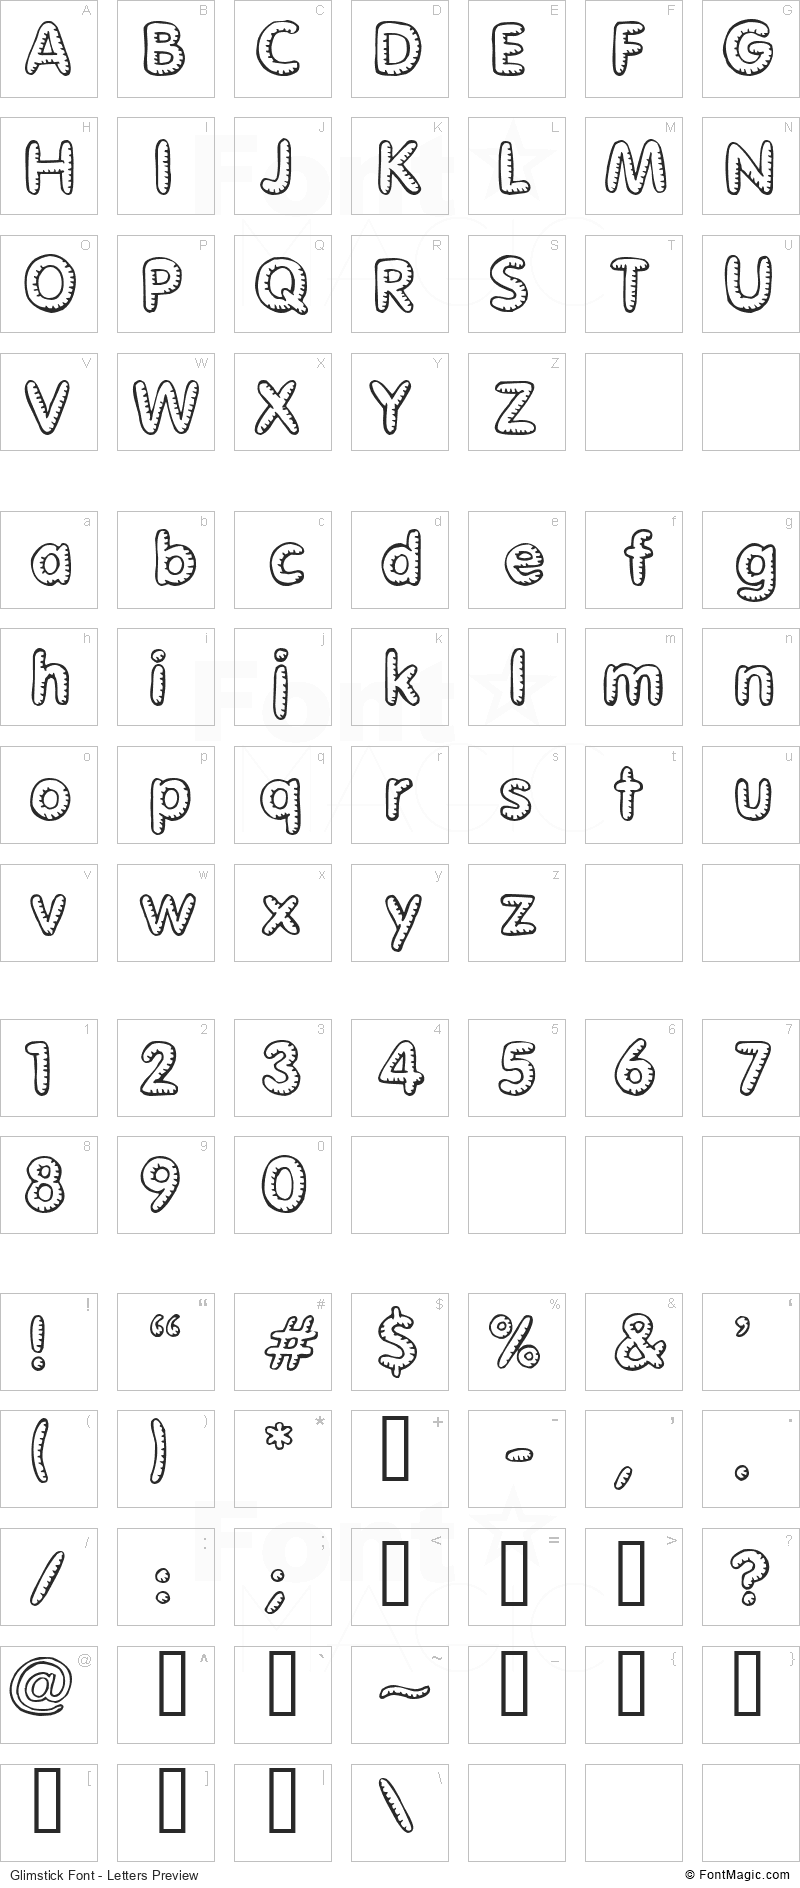 Glimstick Font - All Latters Preview Chart